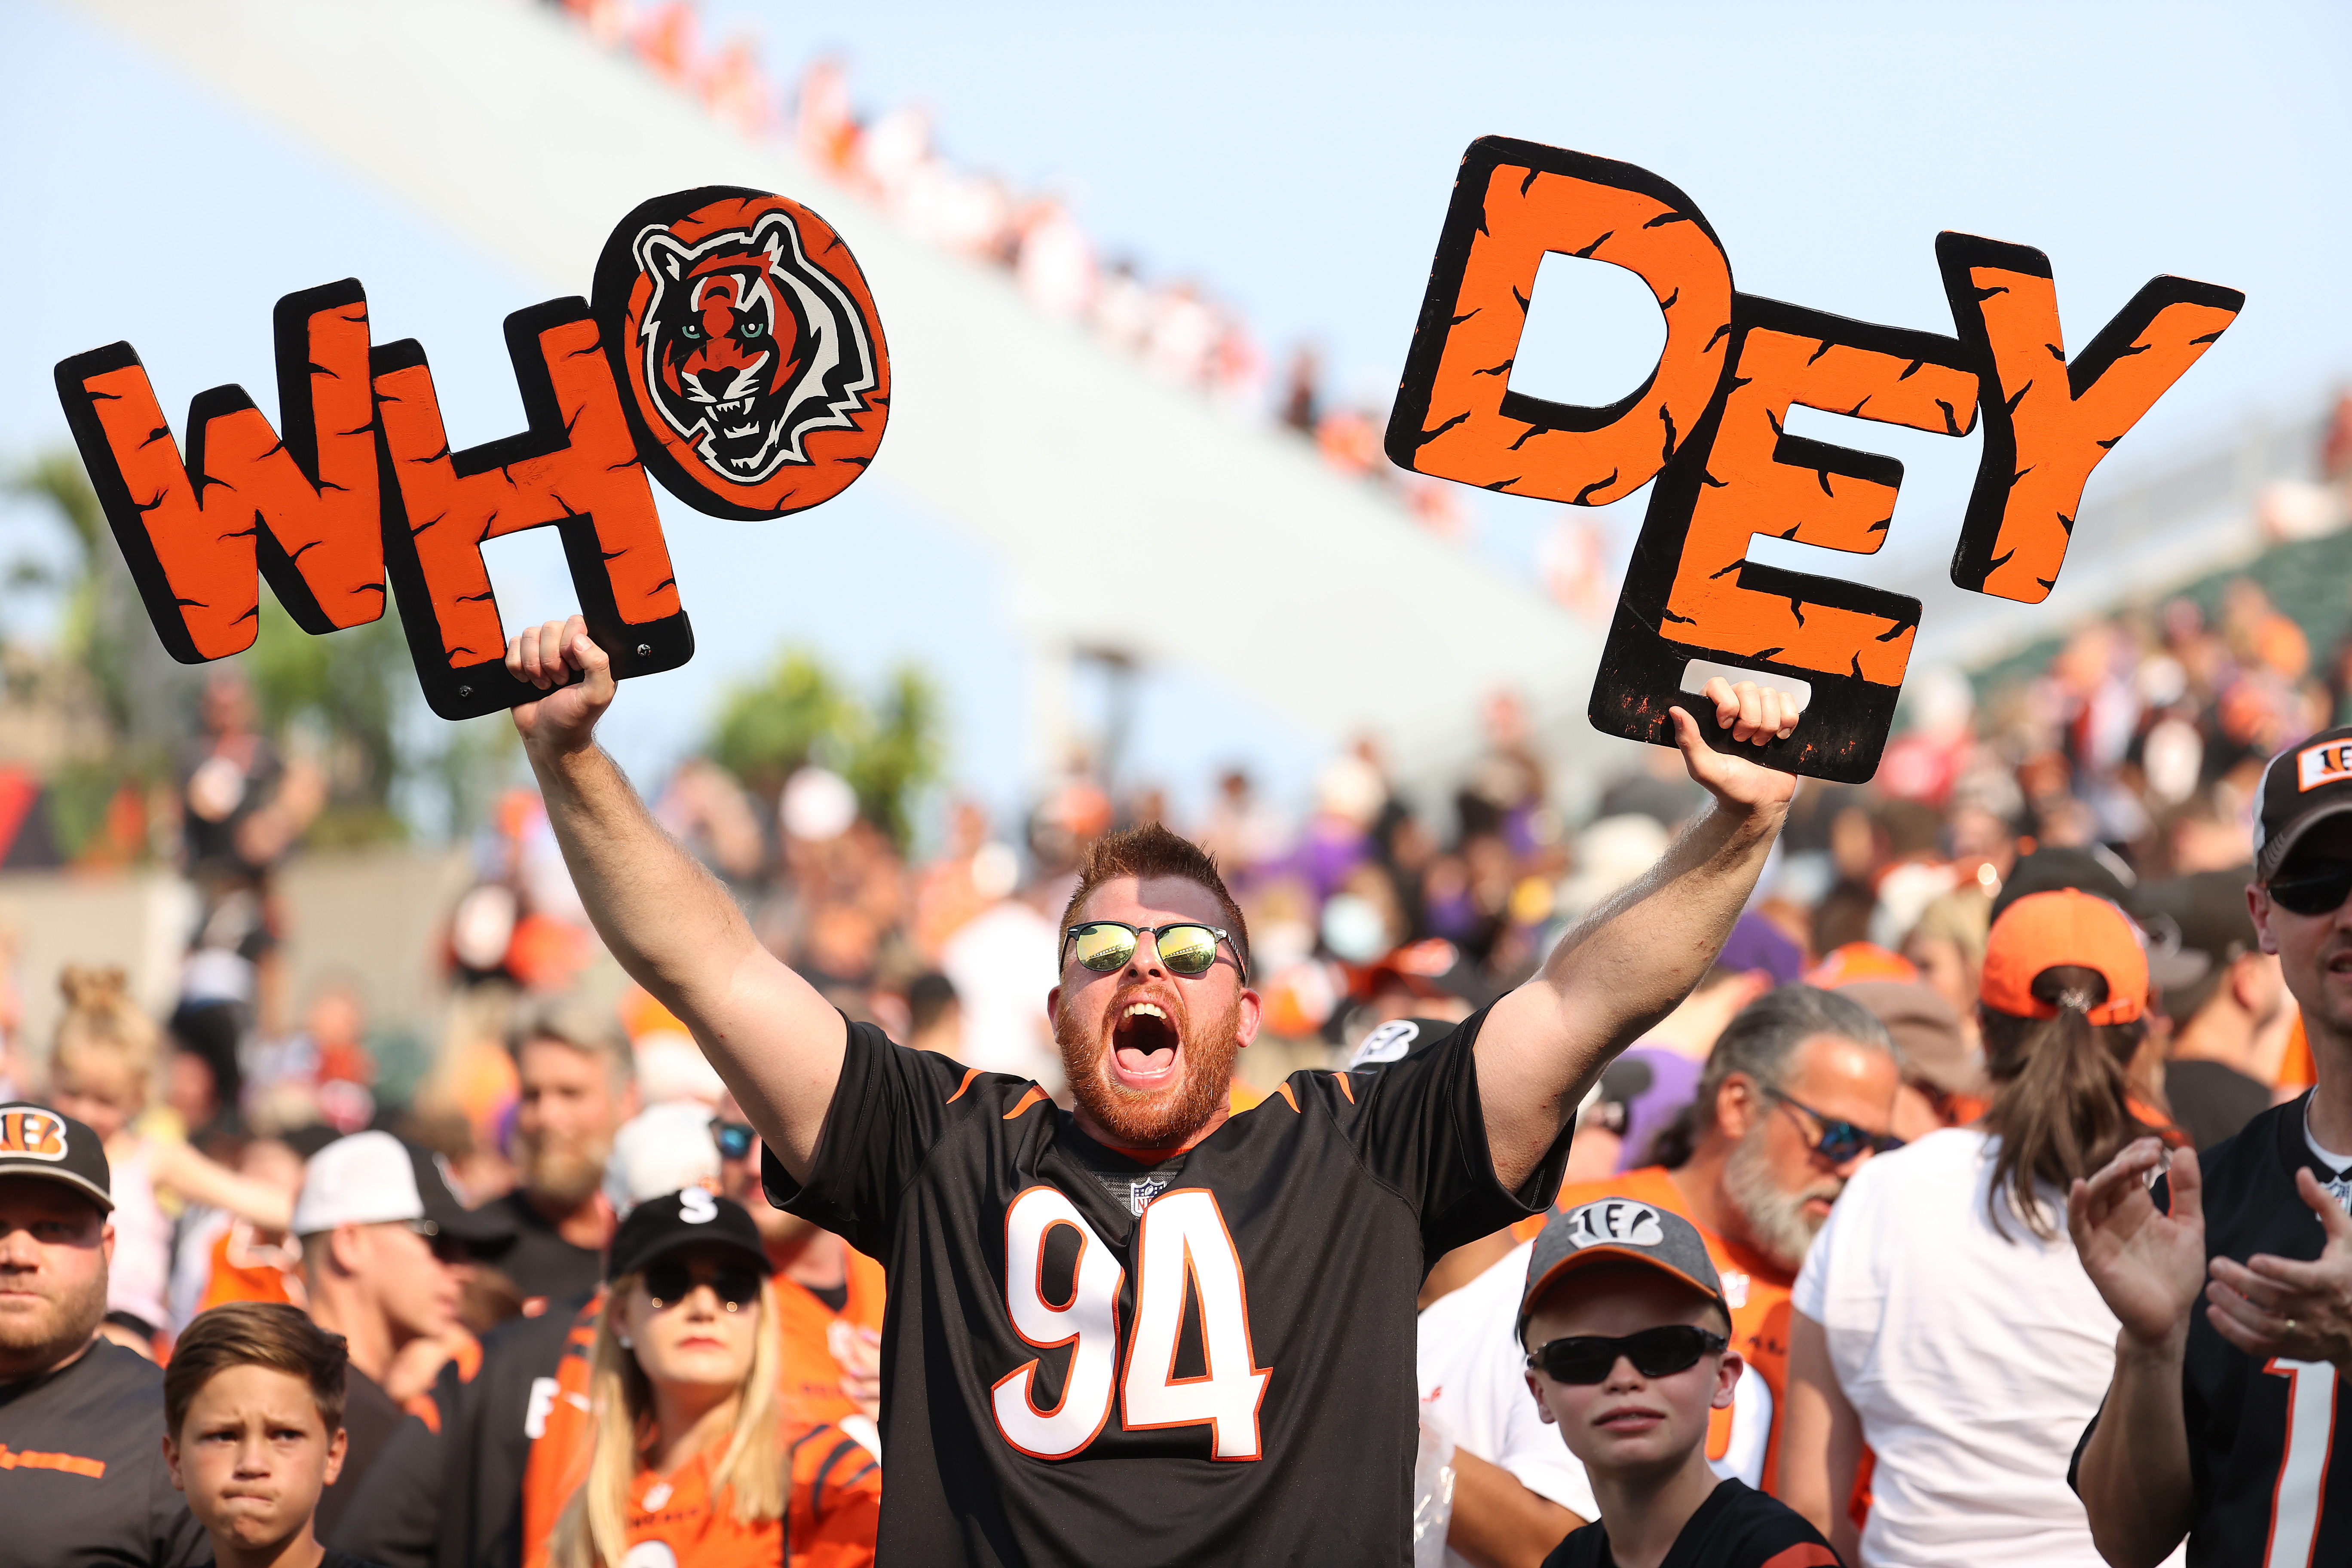 Super Bowl ticket prices 2022: How much to see Rams vs. Bengals in